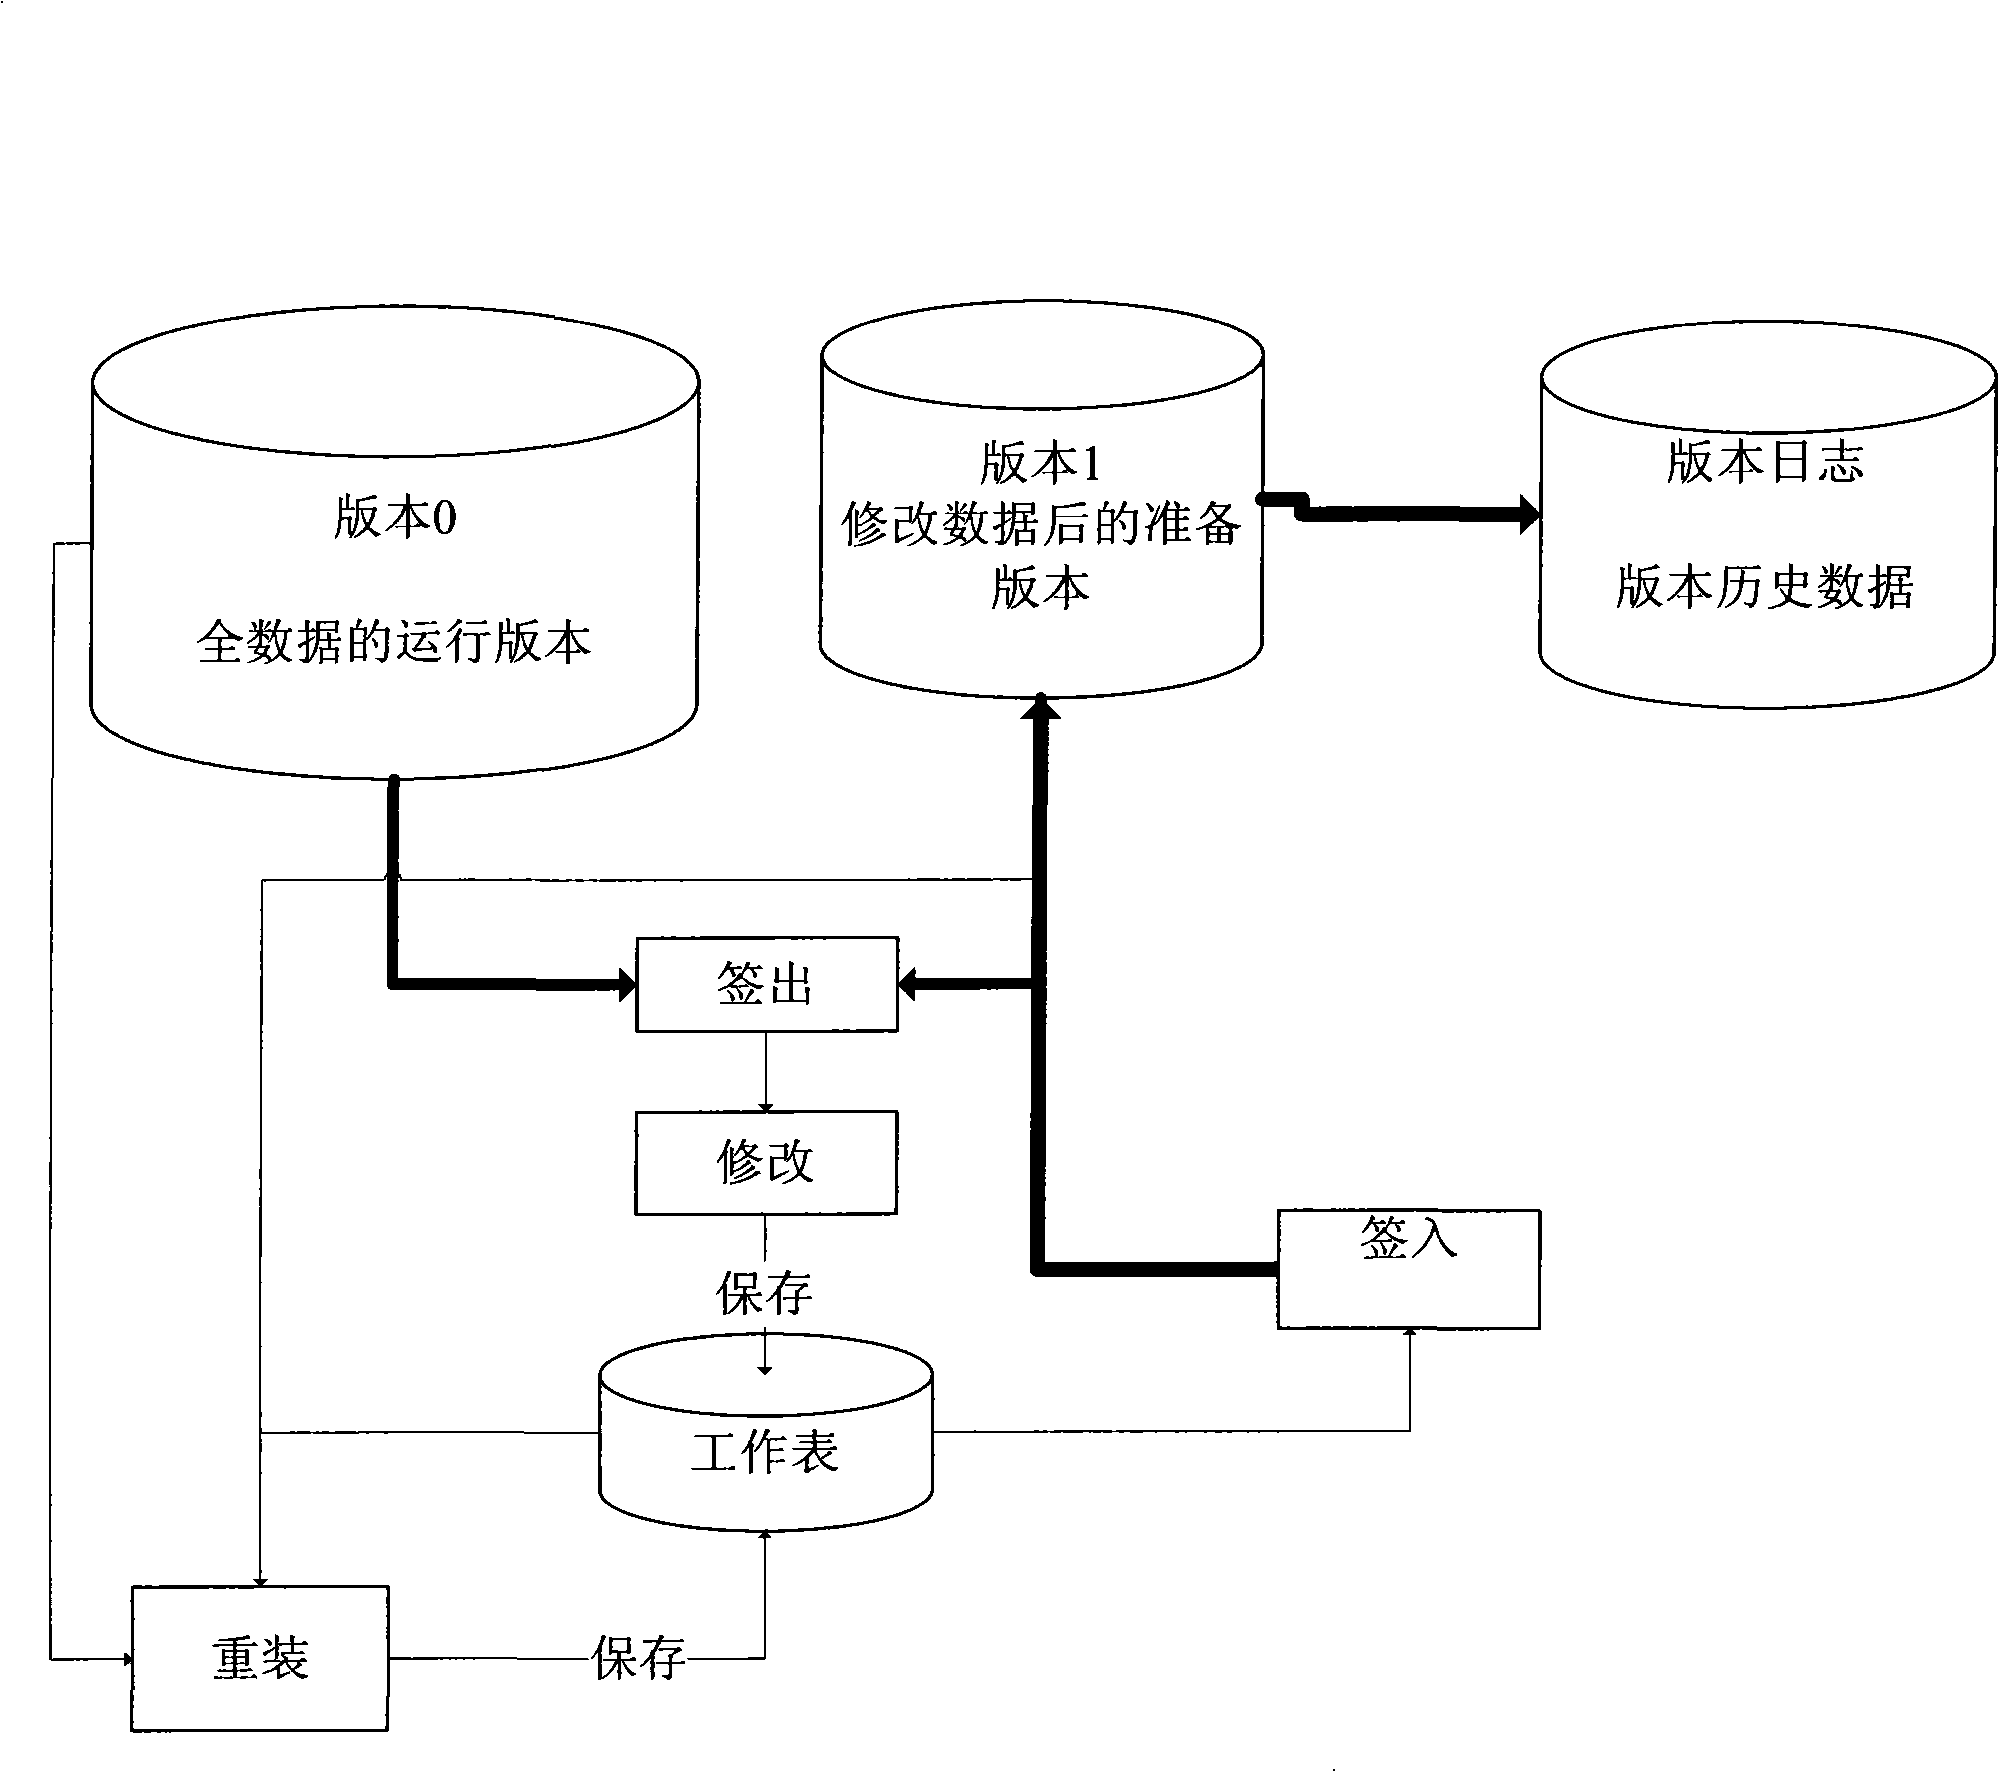 Pattern-model integrated version management method applied in power automatization system